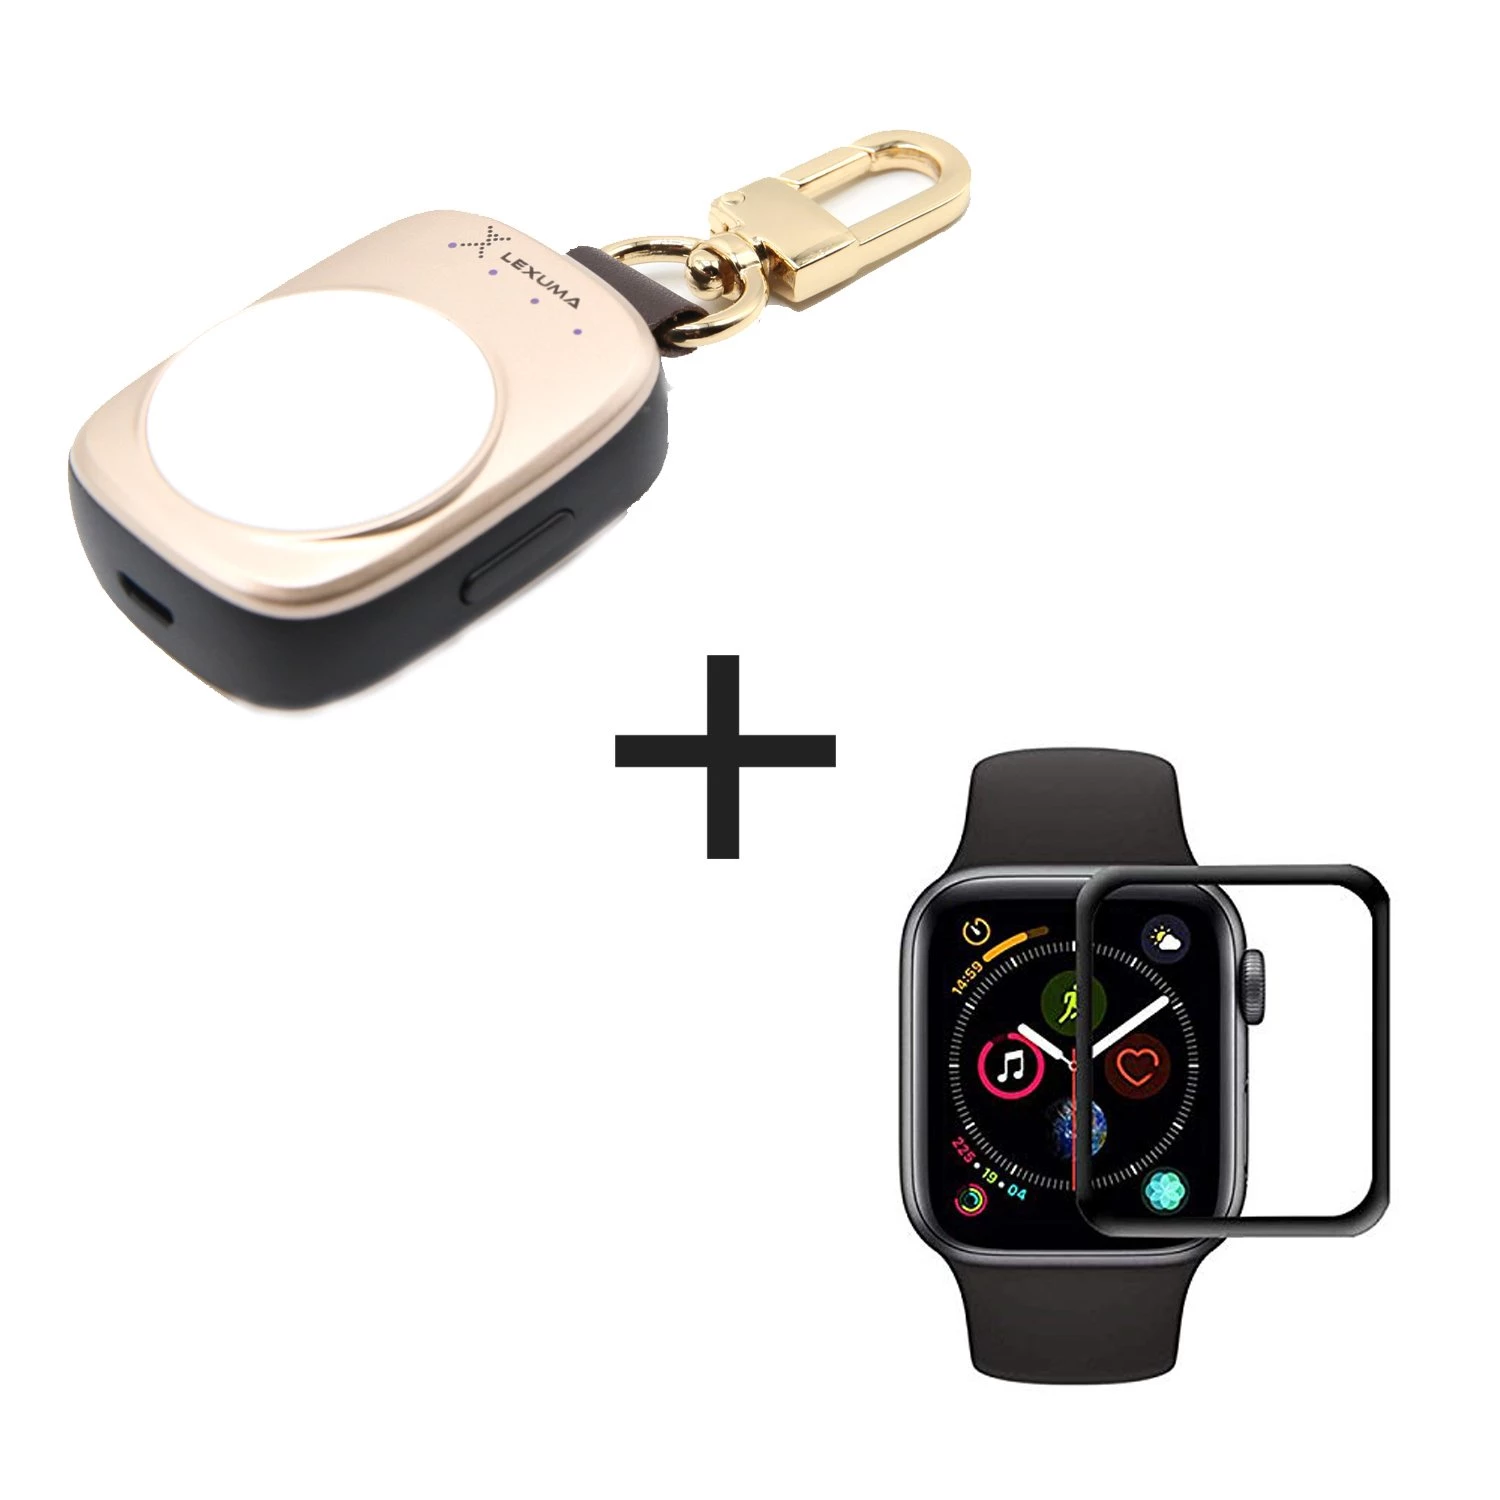 Apple Watch Power Bank Portable CHARGER and Apple Watch Series 4 And Series 5 3D Tempered Glass Screen Protector Wireless CHARGING TRIMBUYSHOP Apple Watch Series 4 Screen Protector Anti Scratch Anti-Fingerprint Tempered Glass Screen Protector Film Present Slide